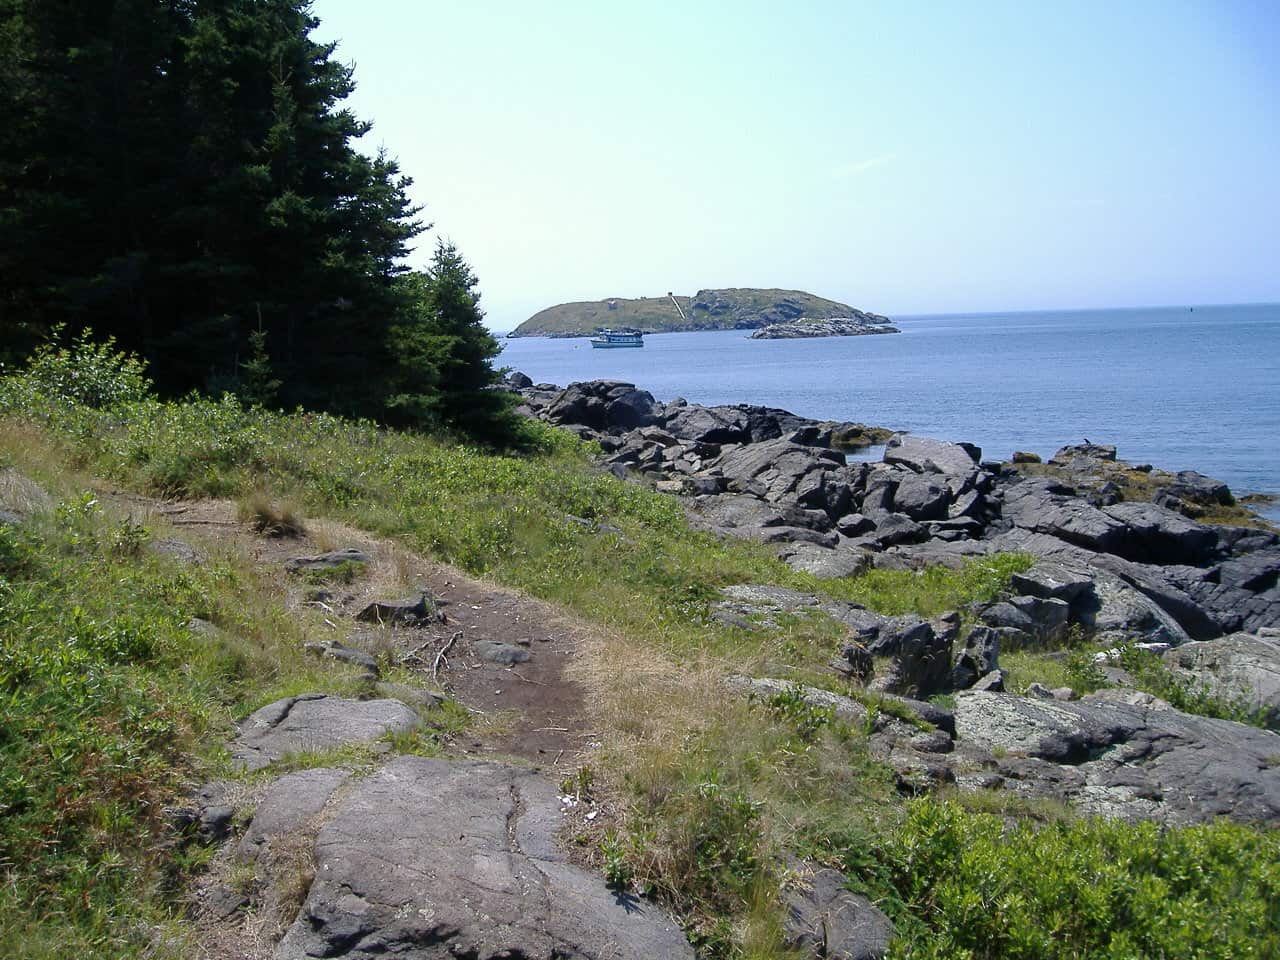 Island trail with rocky shore and another island in the distance.